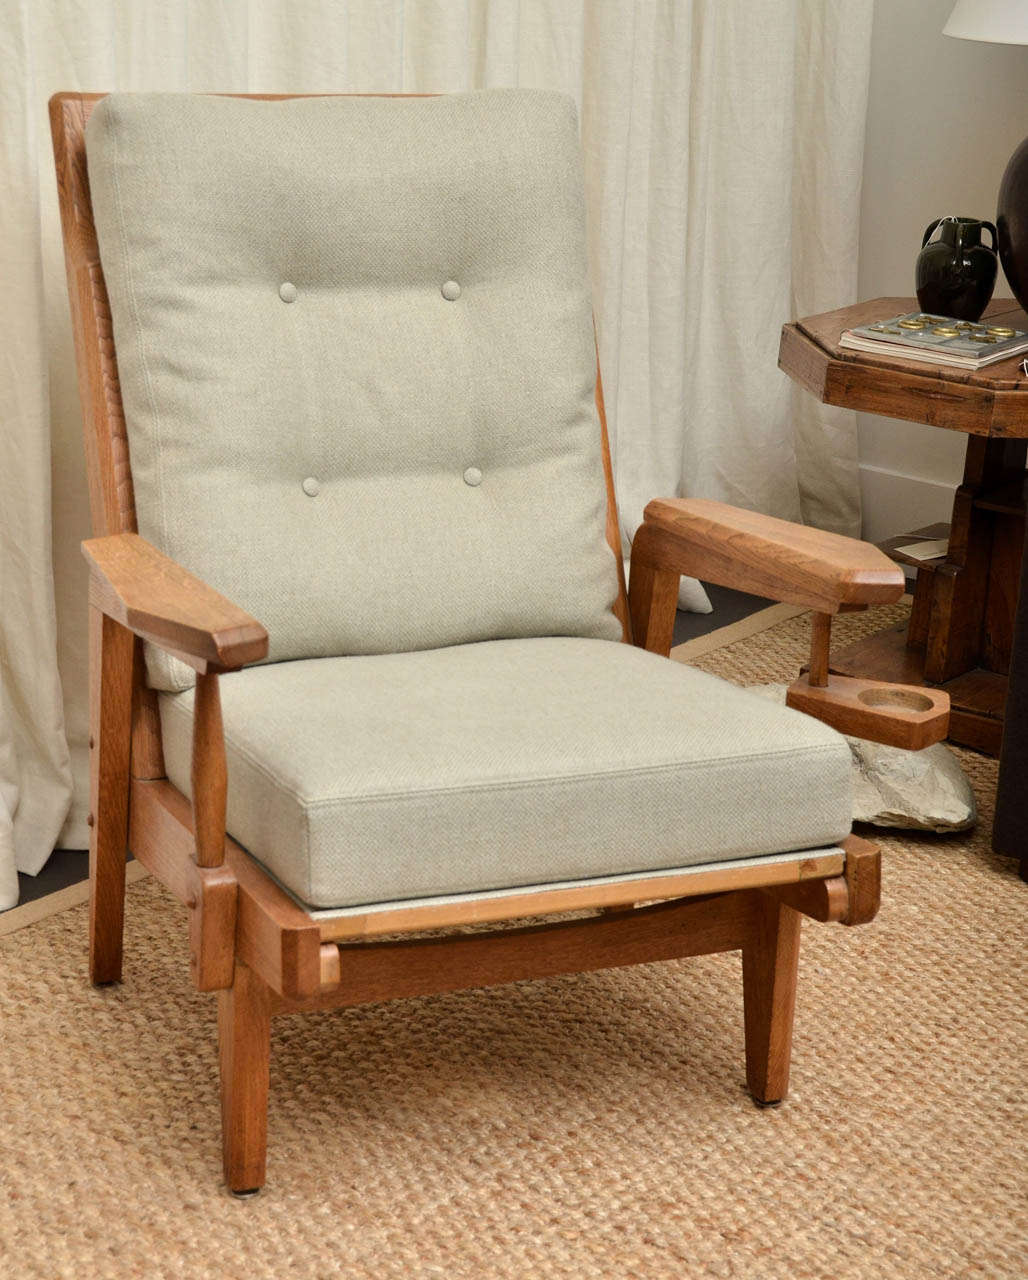 Oak Frame armchair with swivel ashtray detail on one arm.  Newly reupholstered in natural linen with very subtle blue thread woven into the linen.